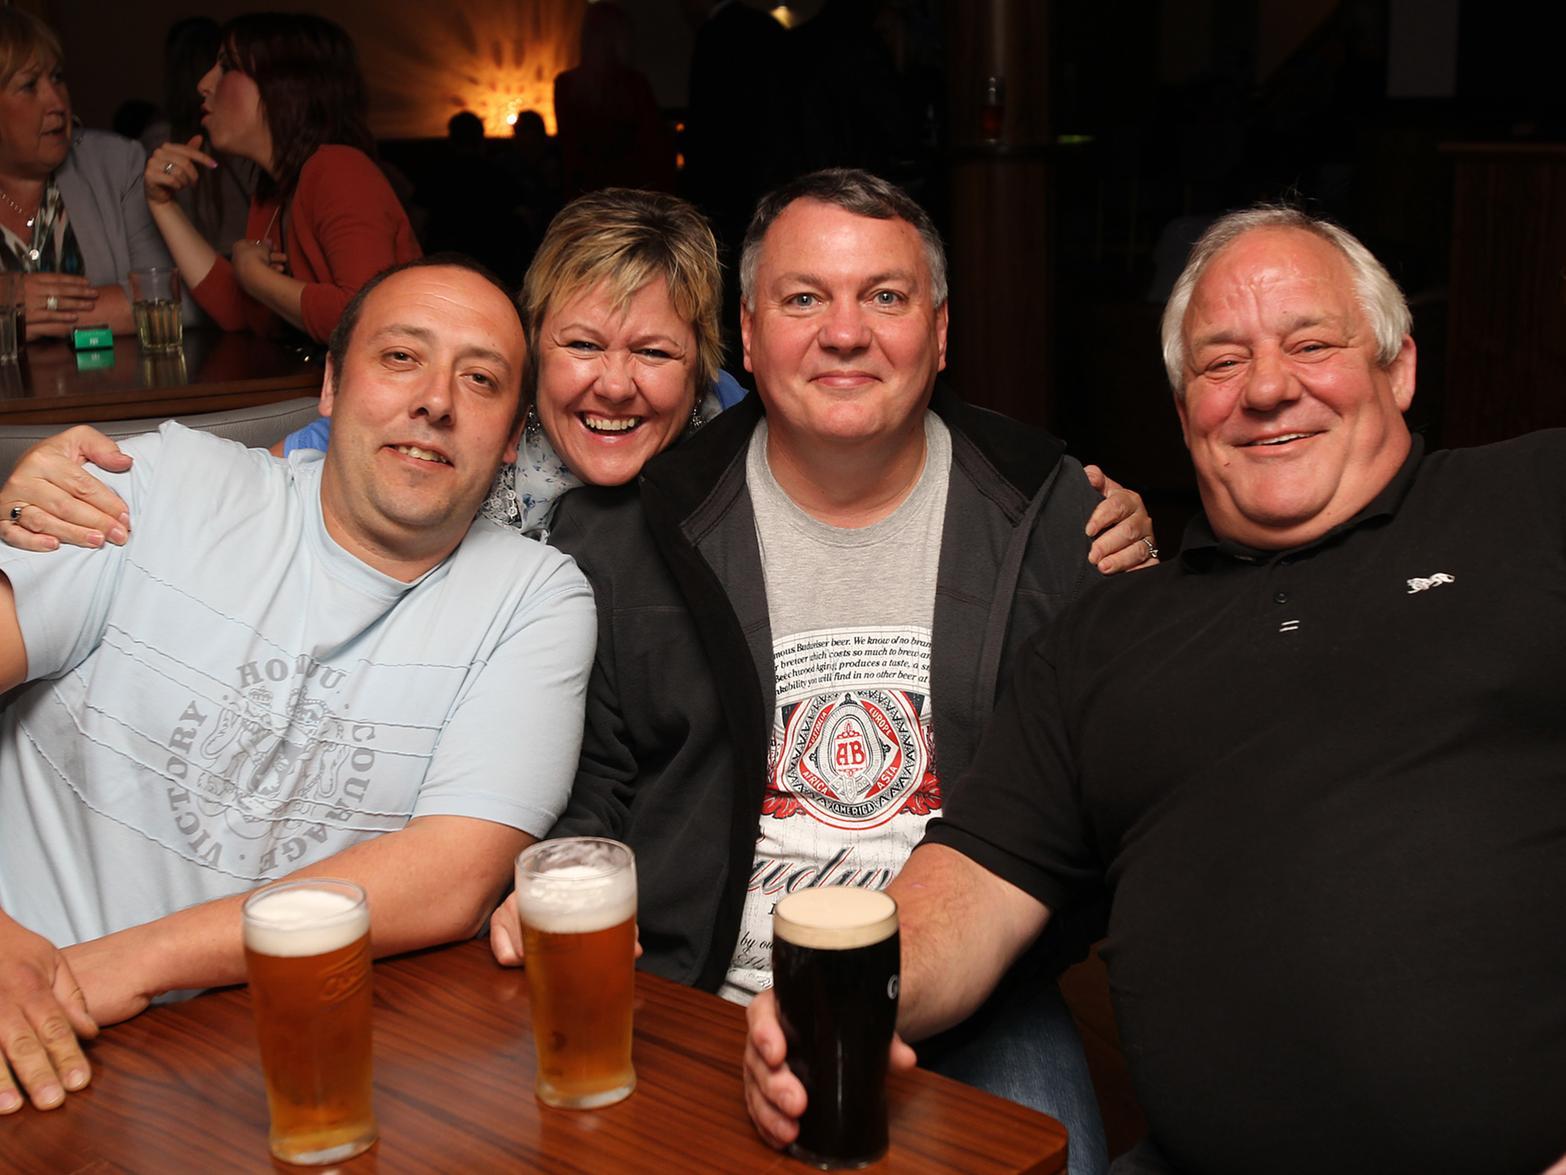 Bob, Nicola, Dunny and Alan on the town in 2012.